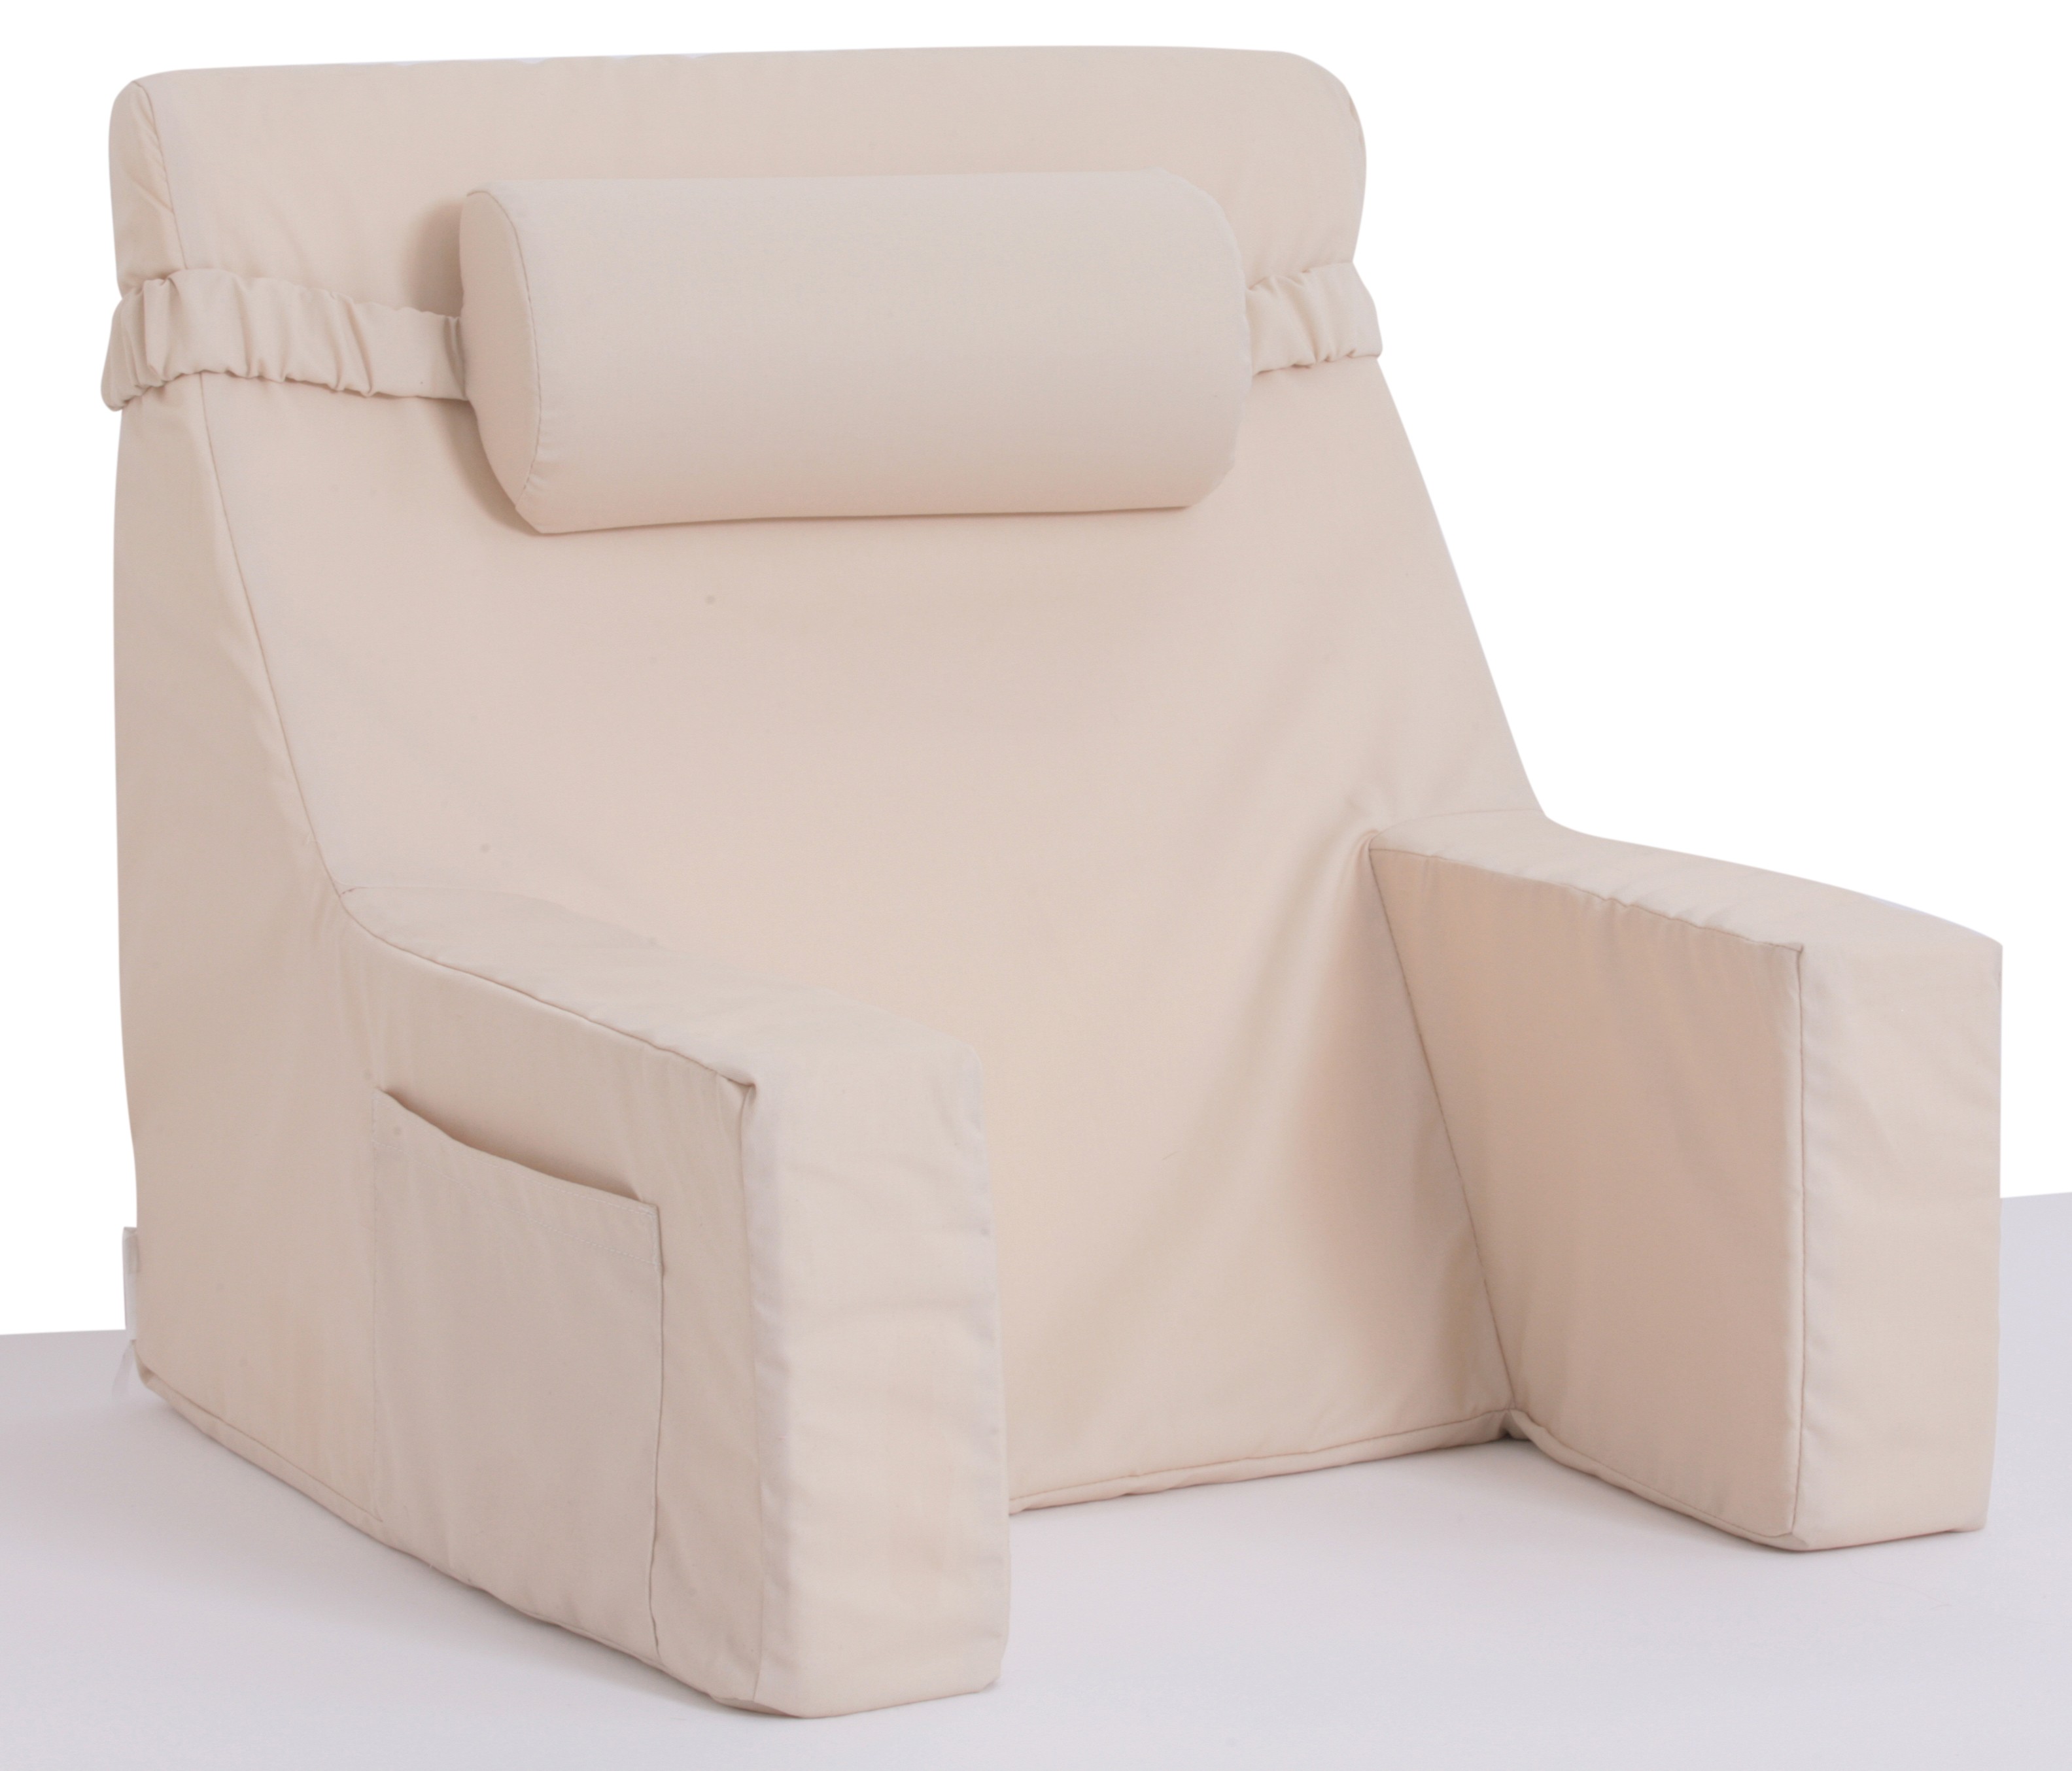 The BedLounge Back Support Cushion